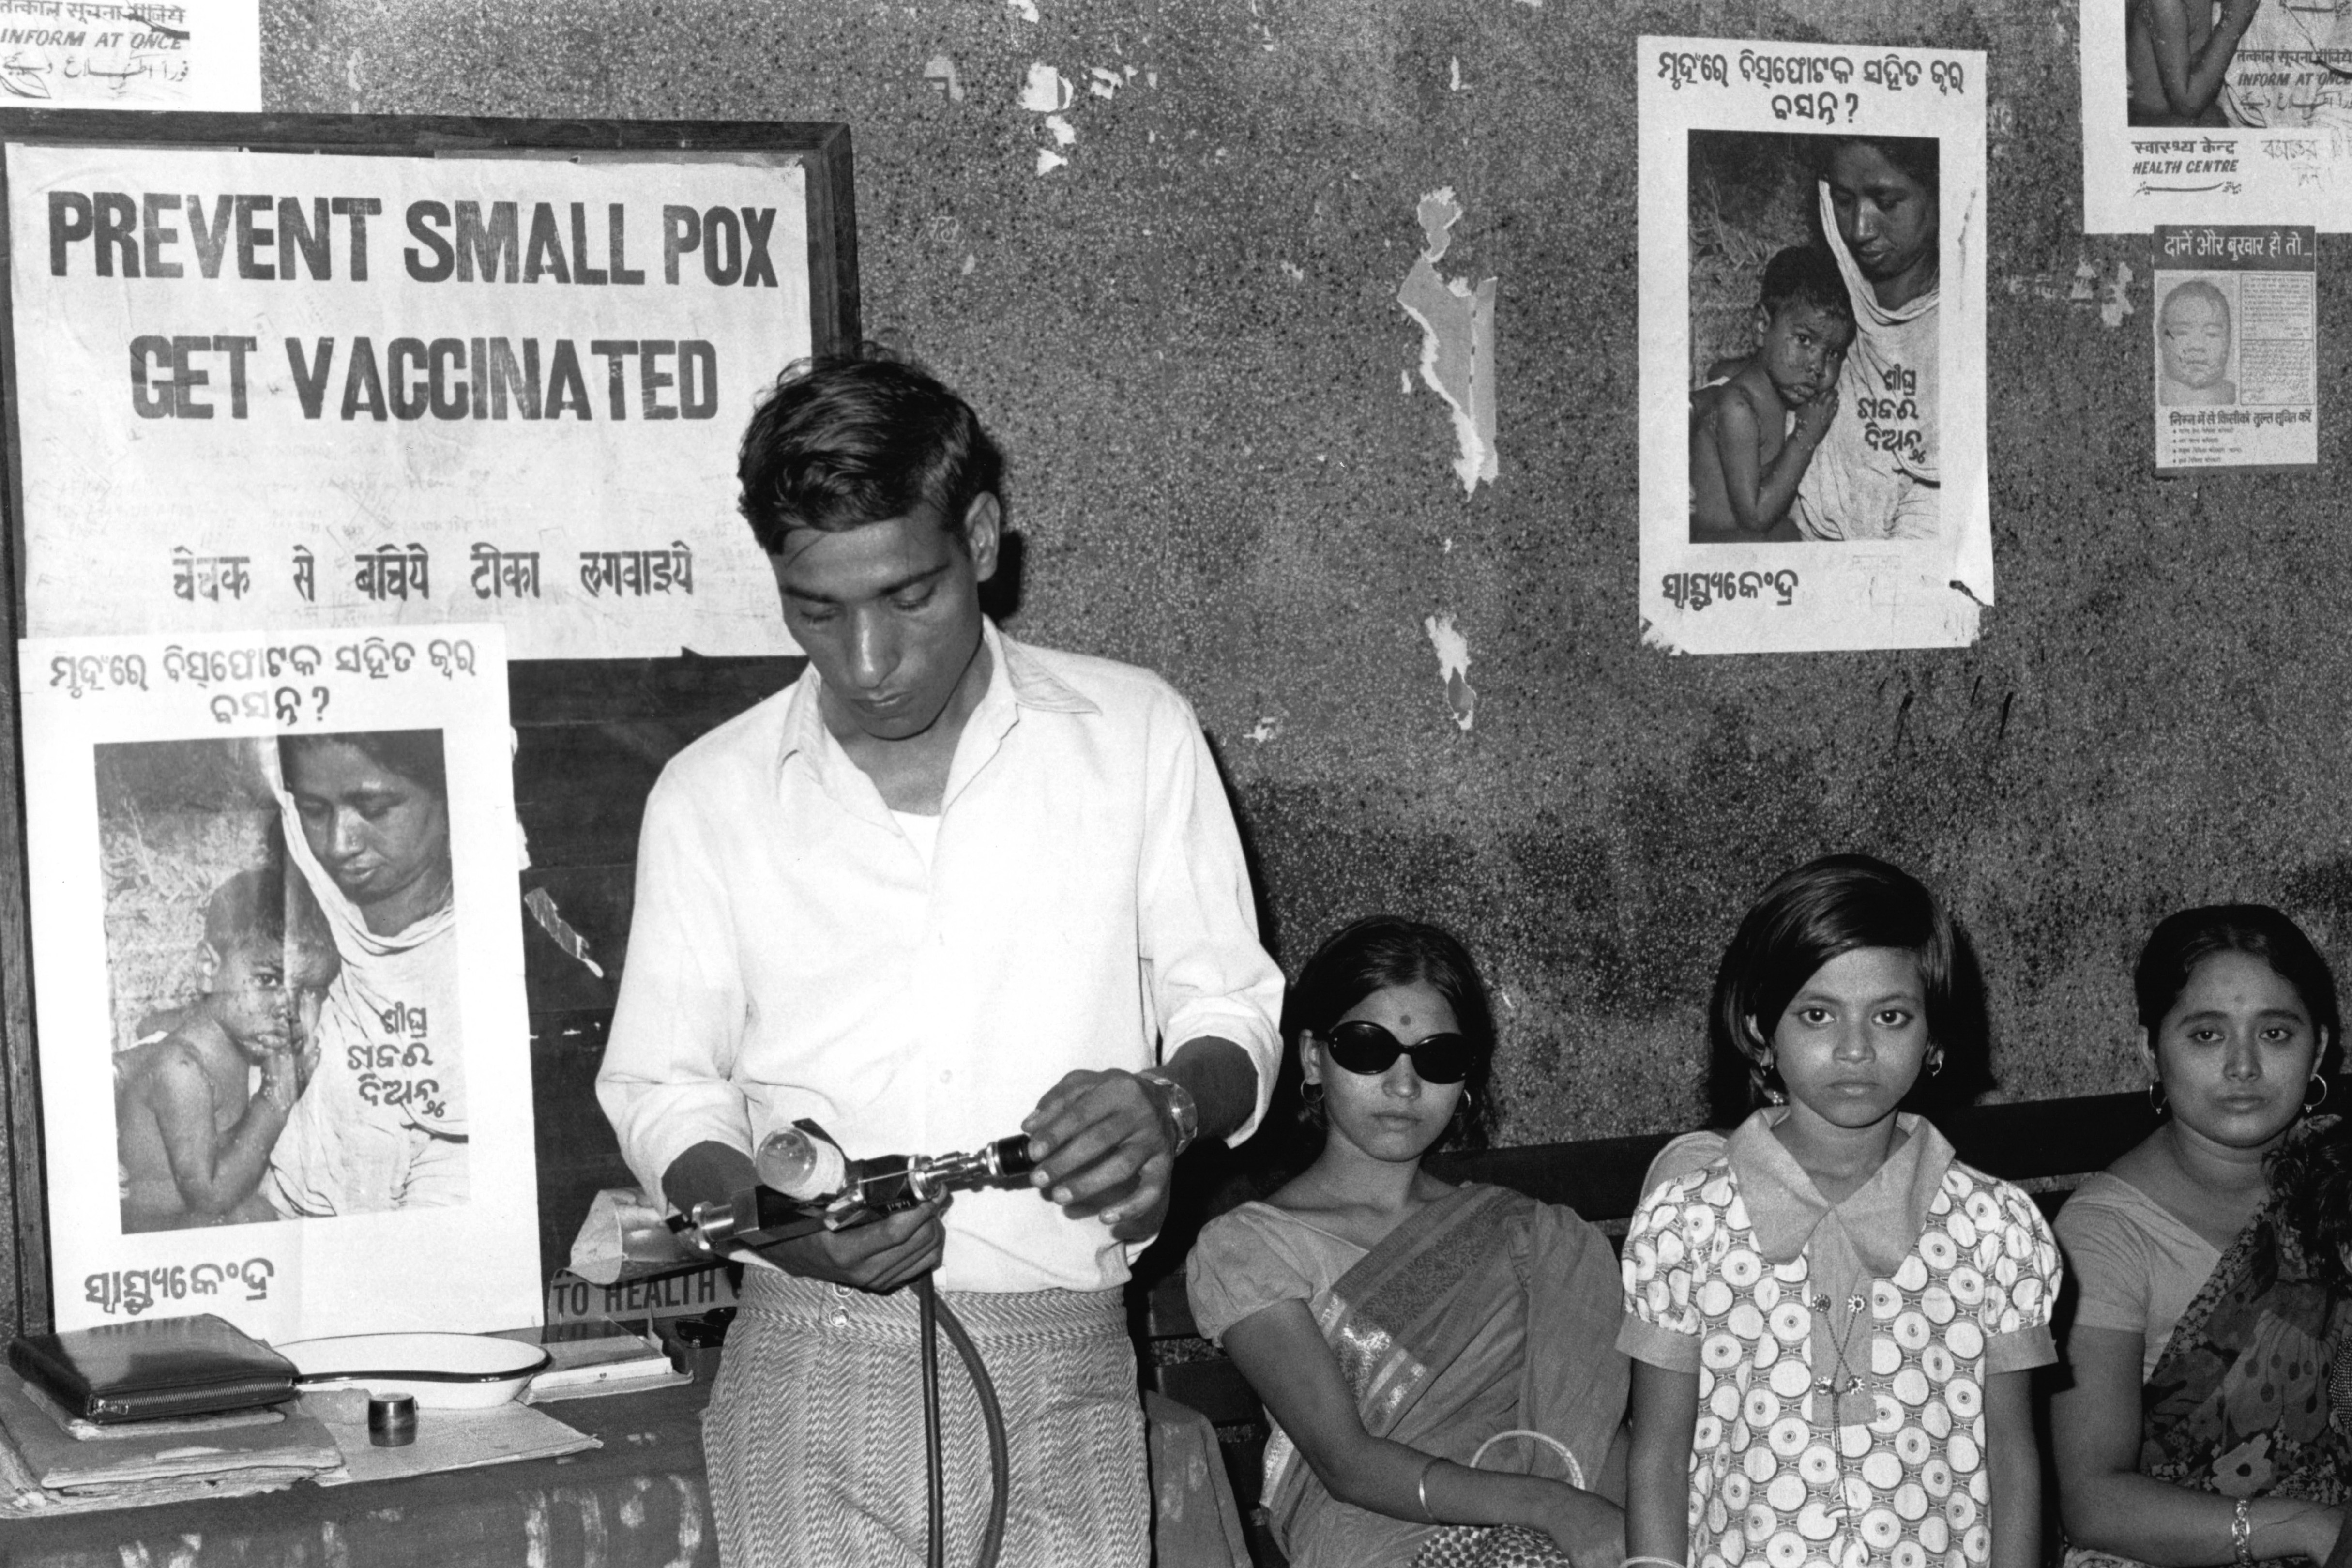 In this 1974, black and white film photograph, a doctor is standing beside two women and one young girl who are waiting to be vaccinated. He holds a jet injectorIn his hands, preparing for vaccination. Beside him and on the walls are posters that say, “Prevent Smallpox – Get Vaccinated” and show images of a mother holding a child with smallpox.